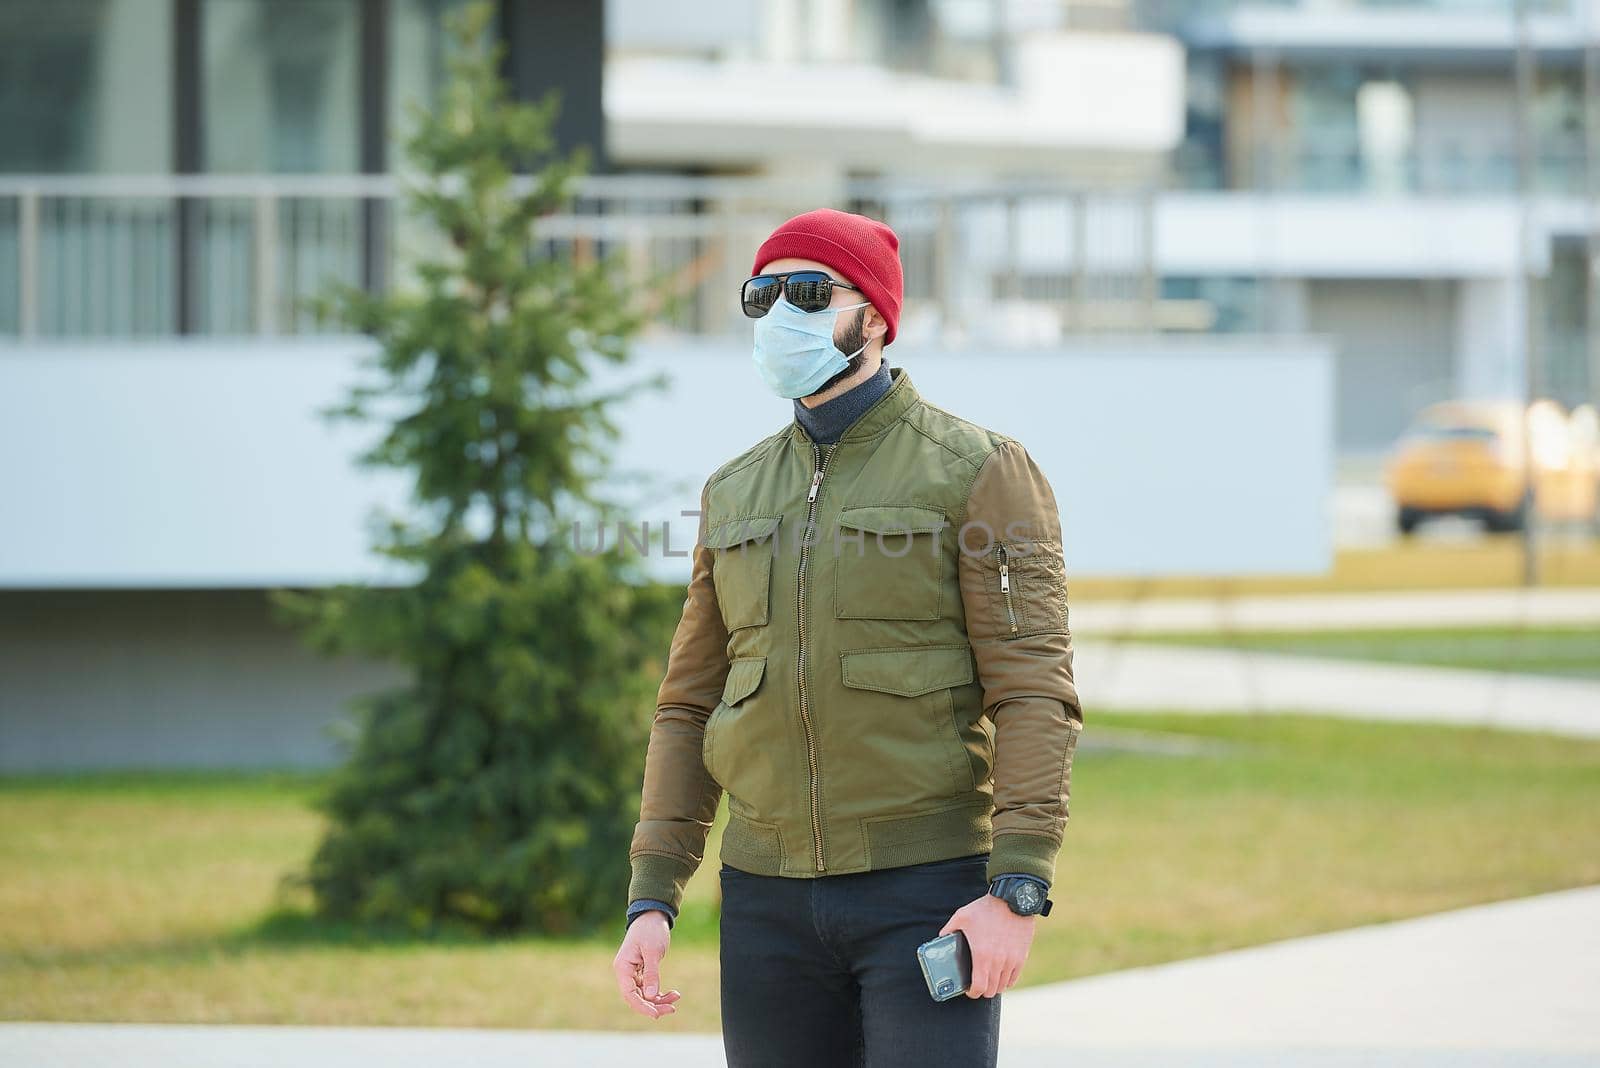 A man in a medical face mask to avoid the spread coronavirus holding his smartphone in a cozy street. A guy waiting wears a red cap, sunglasses, and a face mask against COVID 19.